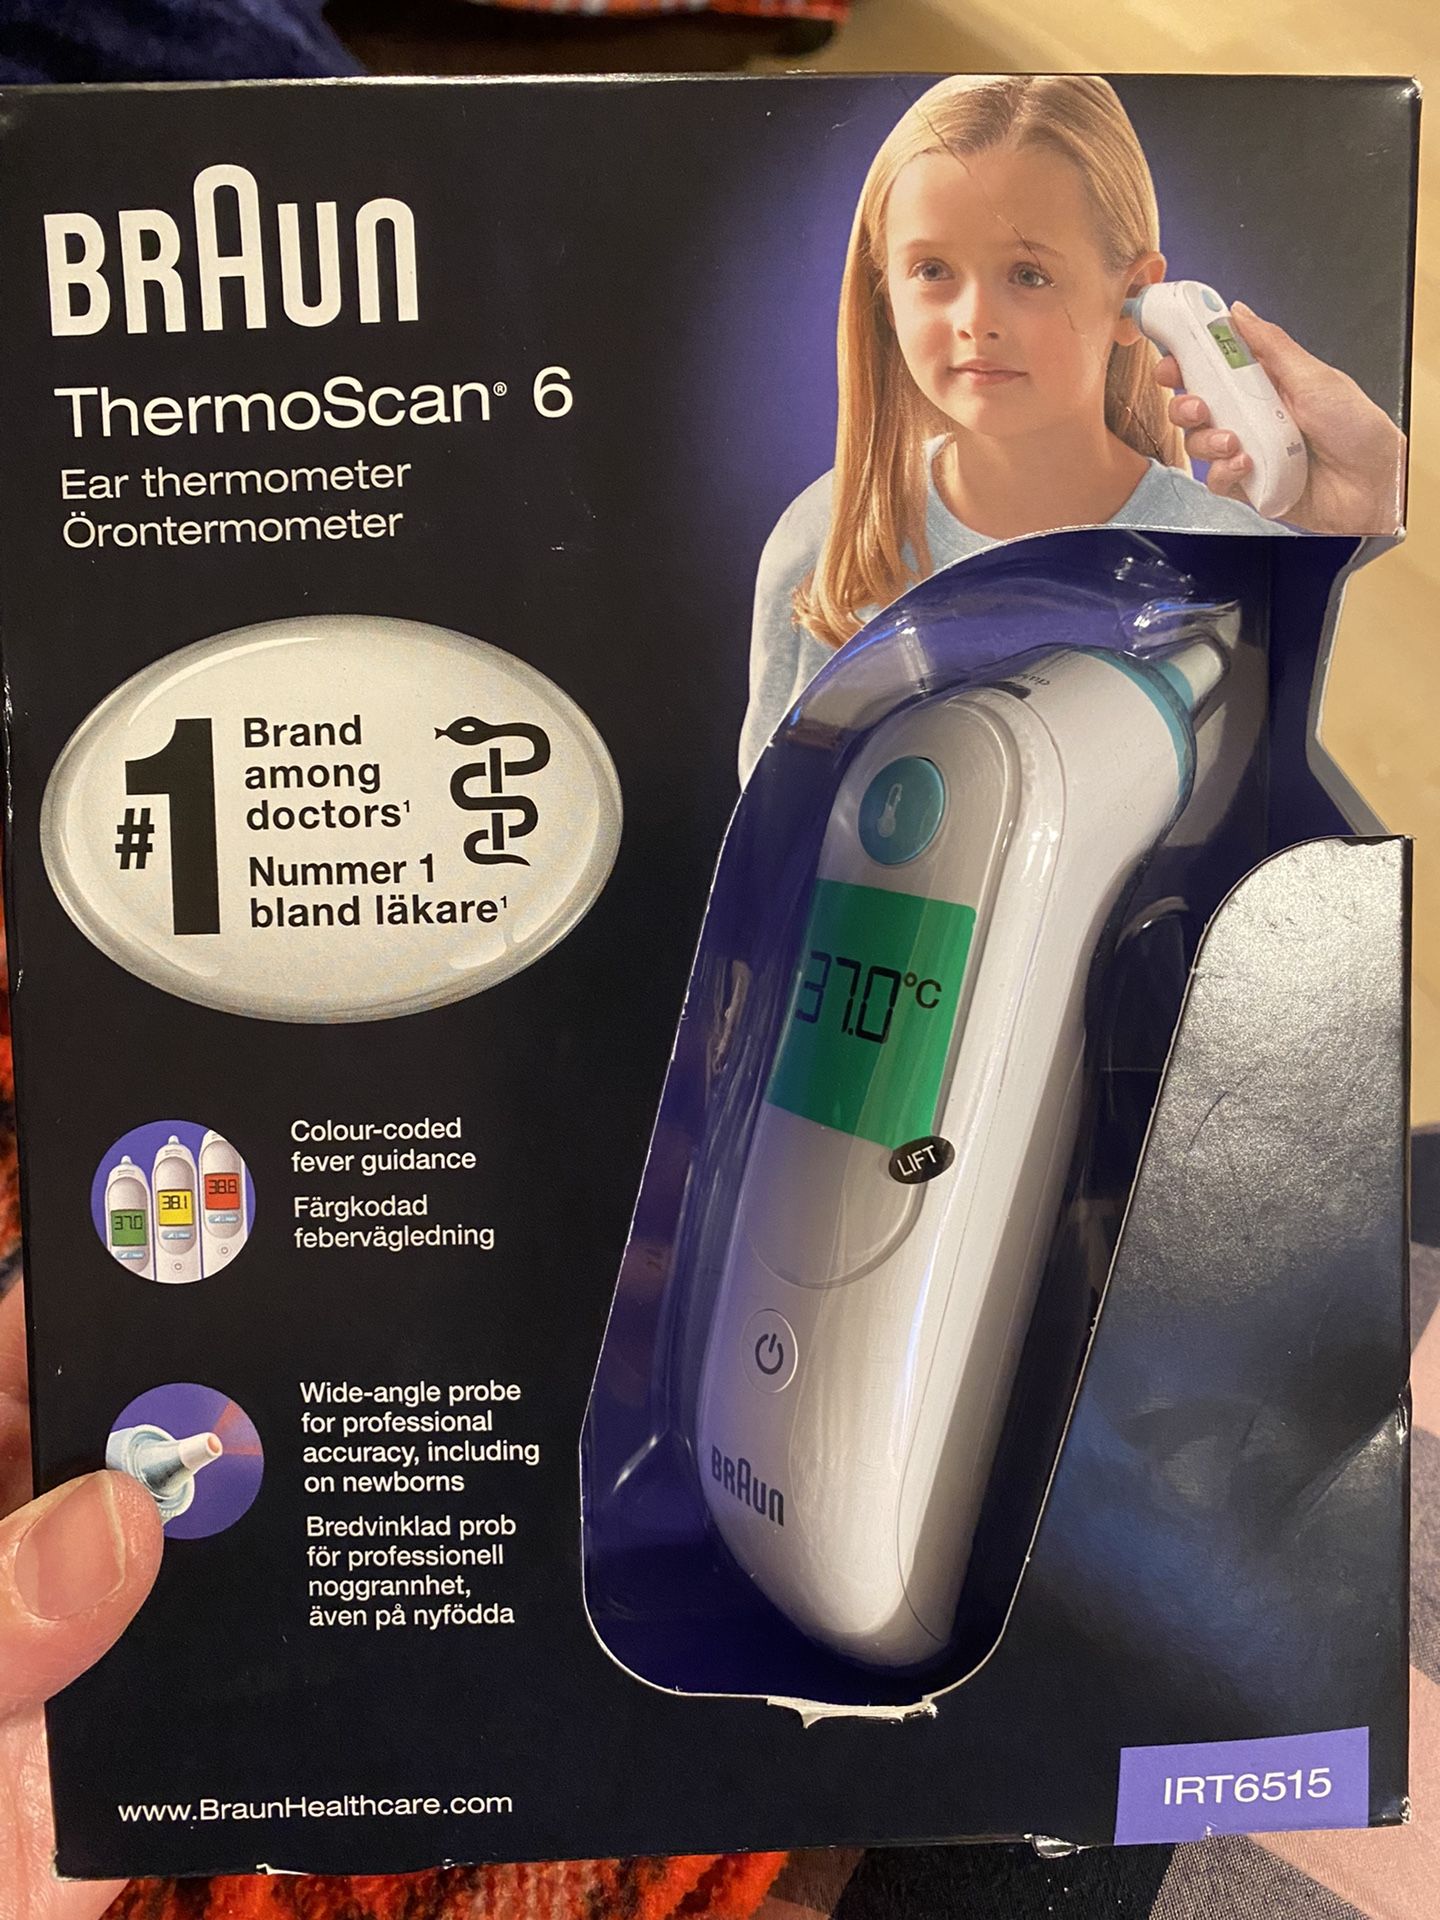 Brand new Braun thermo scan 6 IRT6515 - new in box never used 